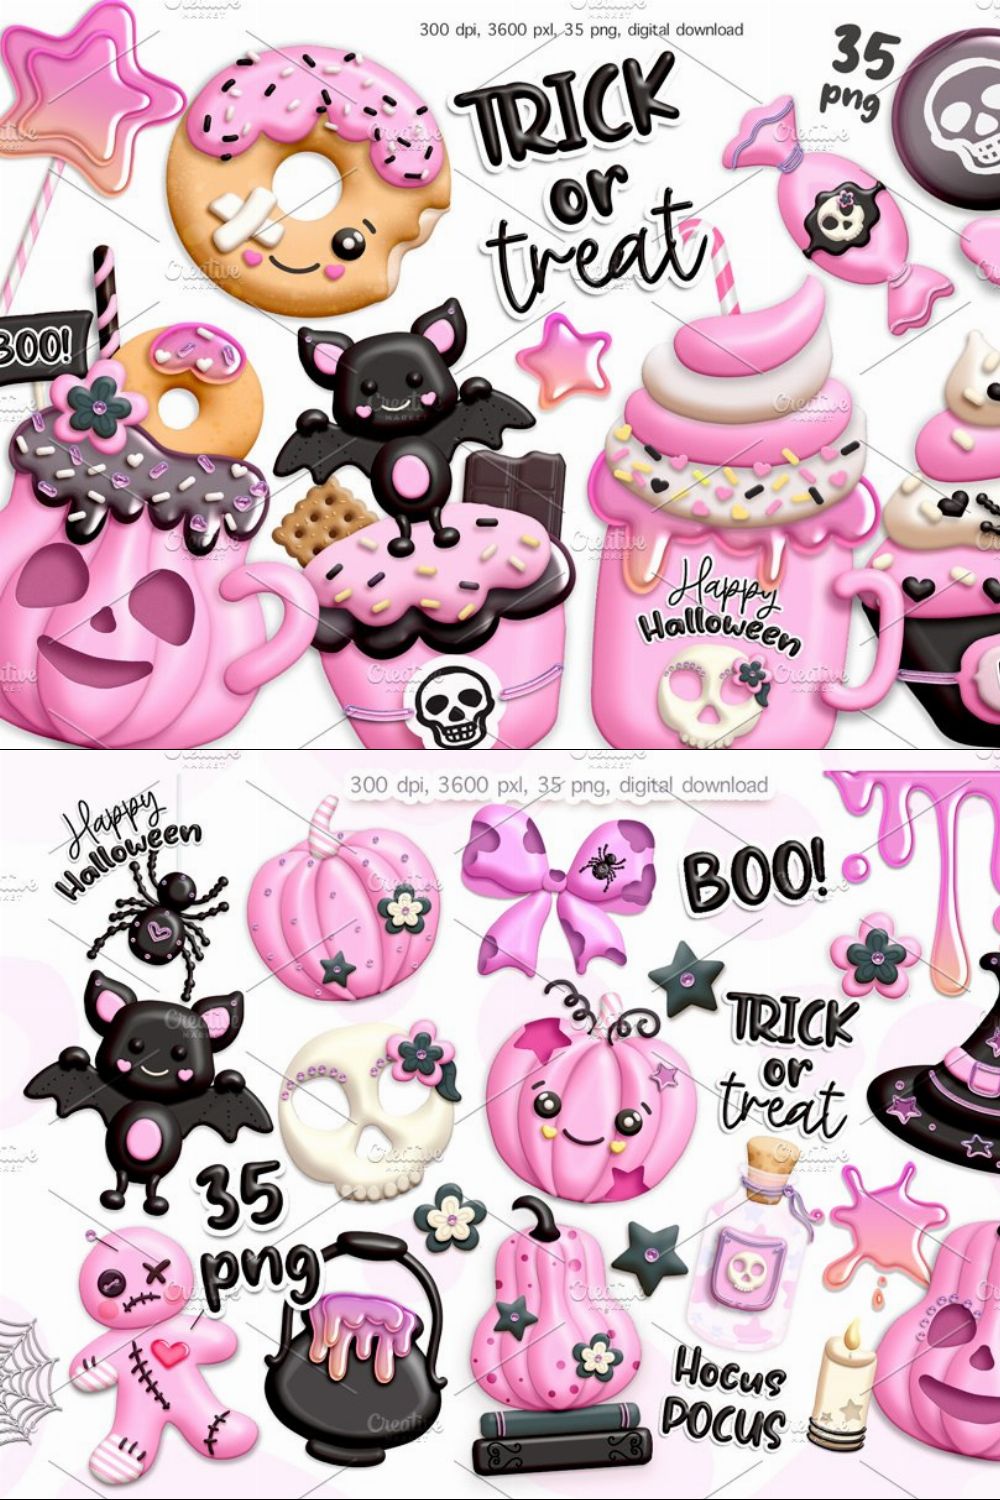 Glam Halloween graphic pinterest preview image.